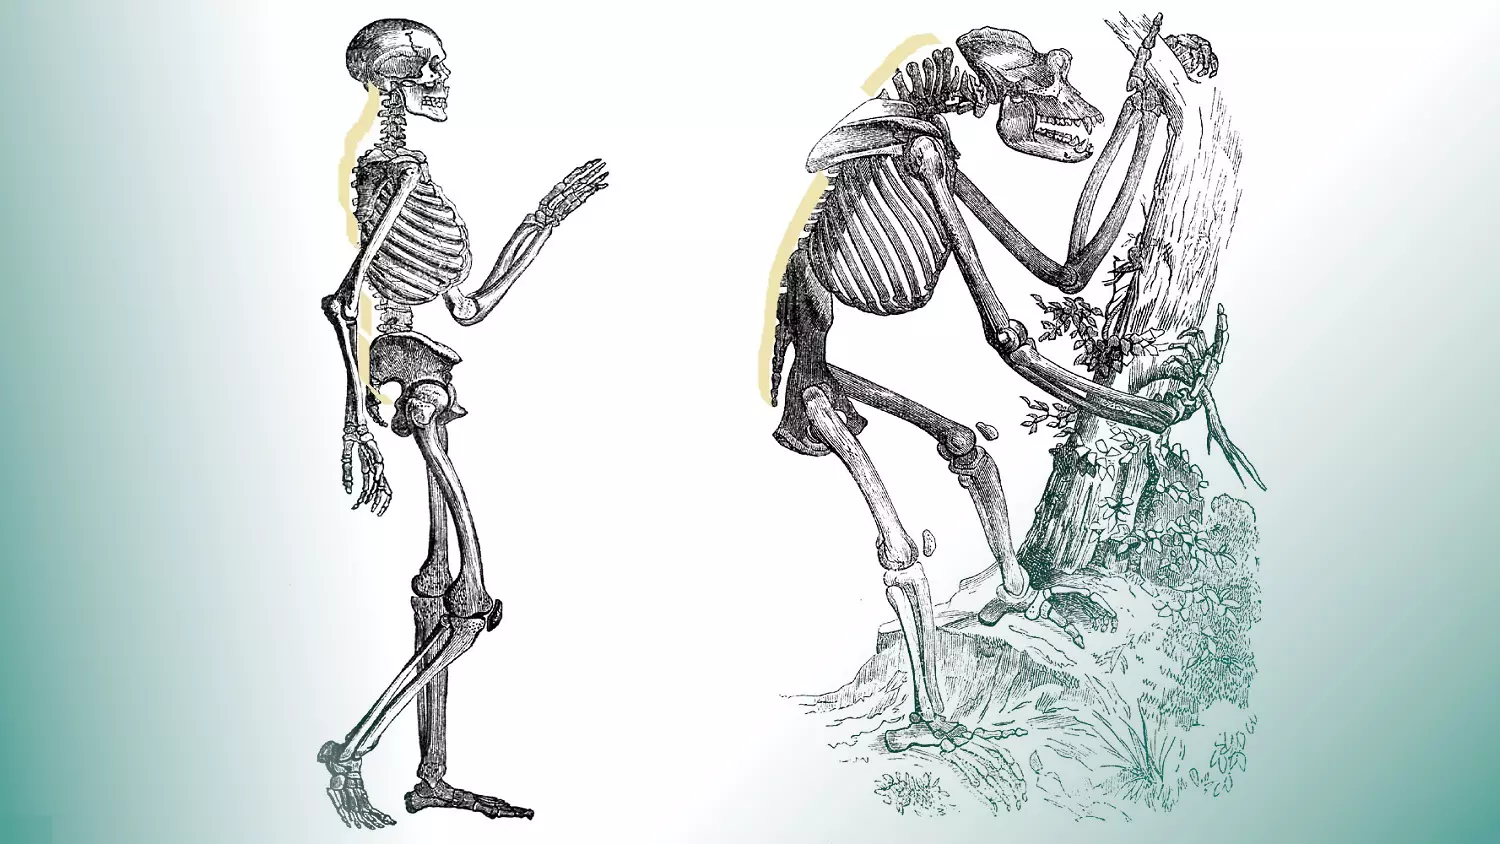 Drawings of Ape and Human Skeletons from 1859